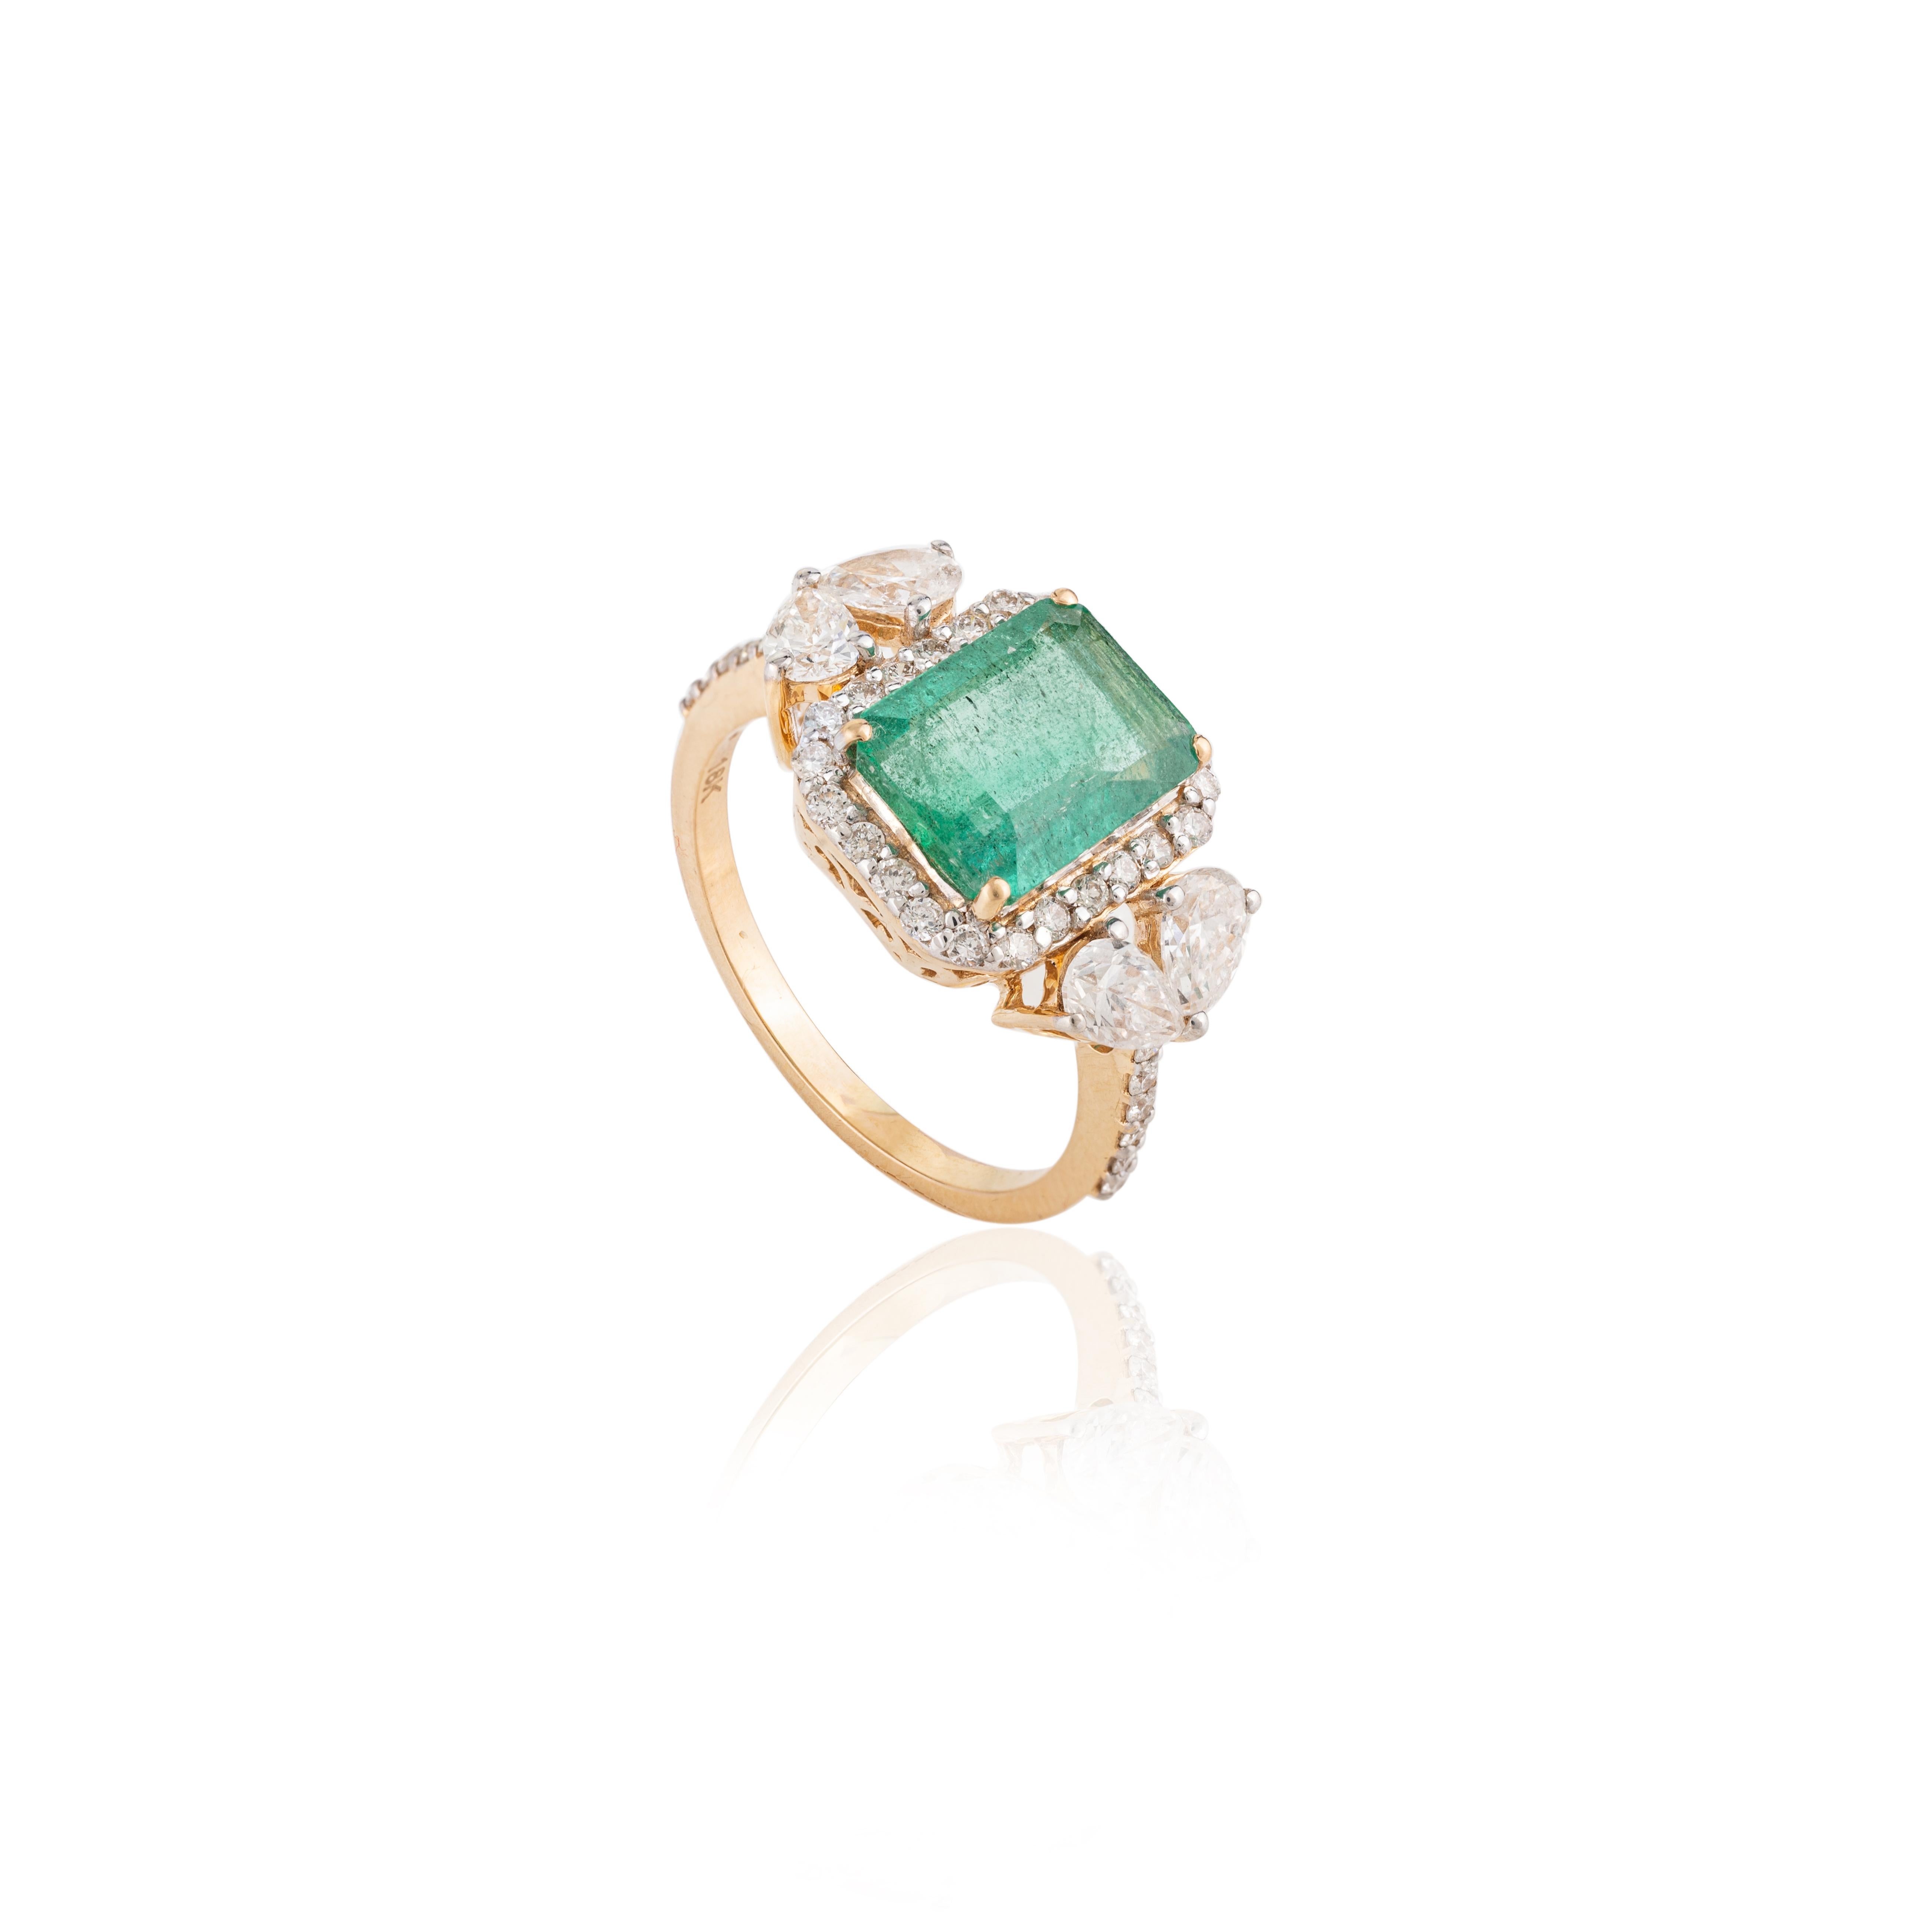 For Sale:  Designer Emerald Birthstone Diamond Big Cocktail Ring in 18k Solid Yellow Gold 6